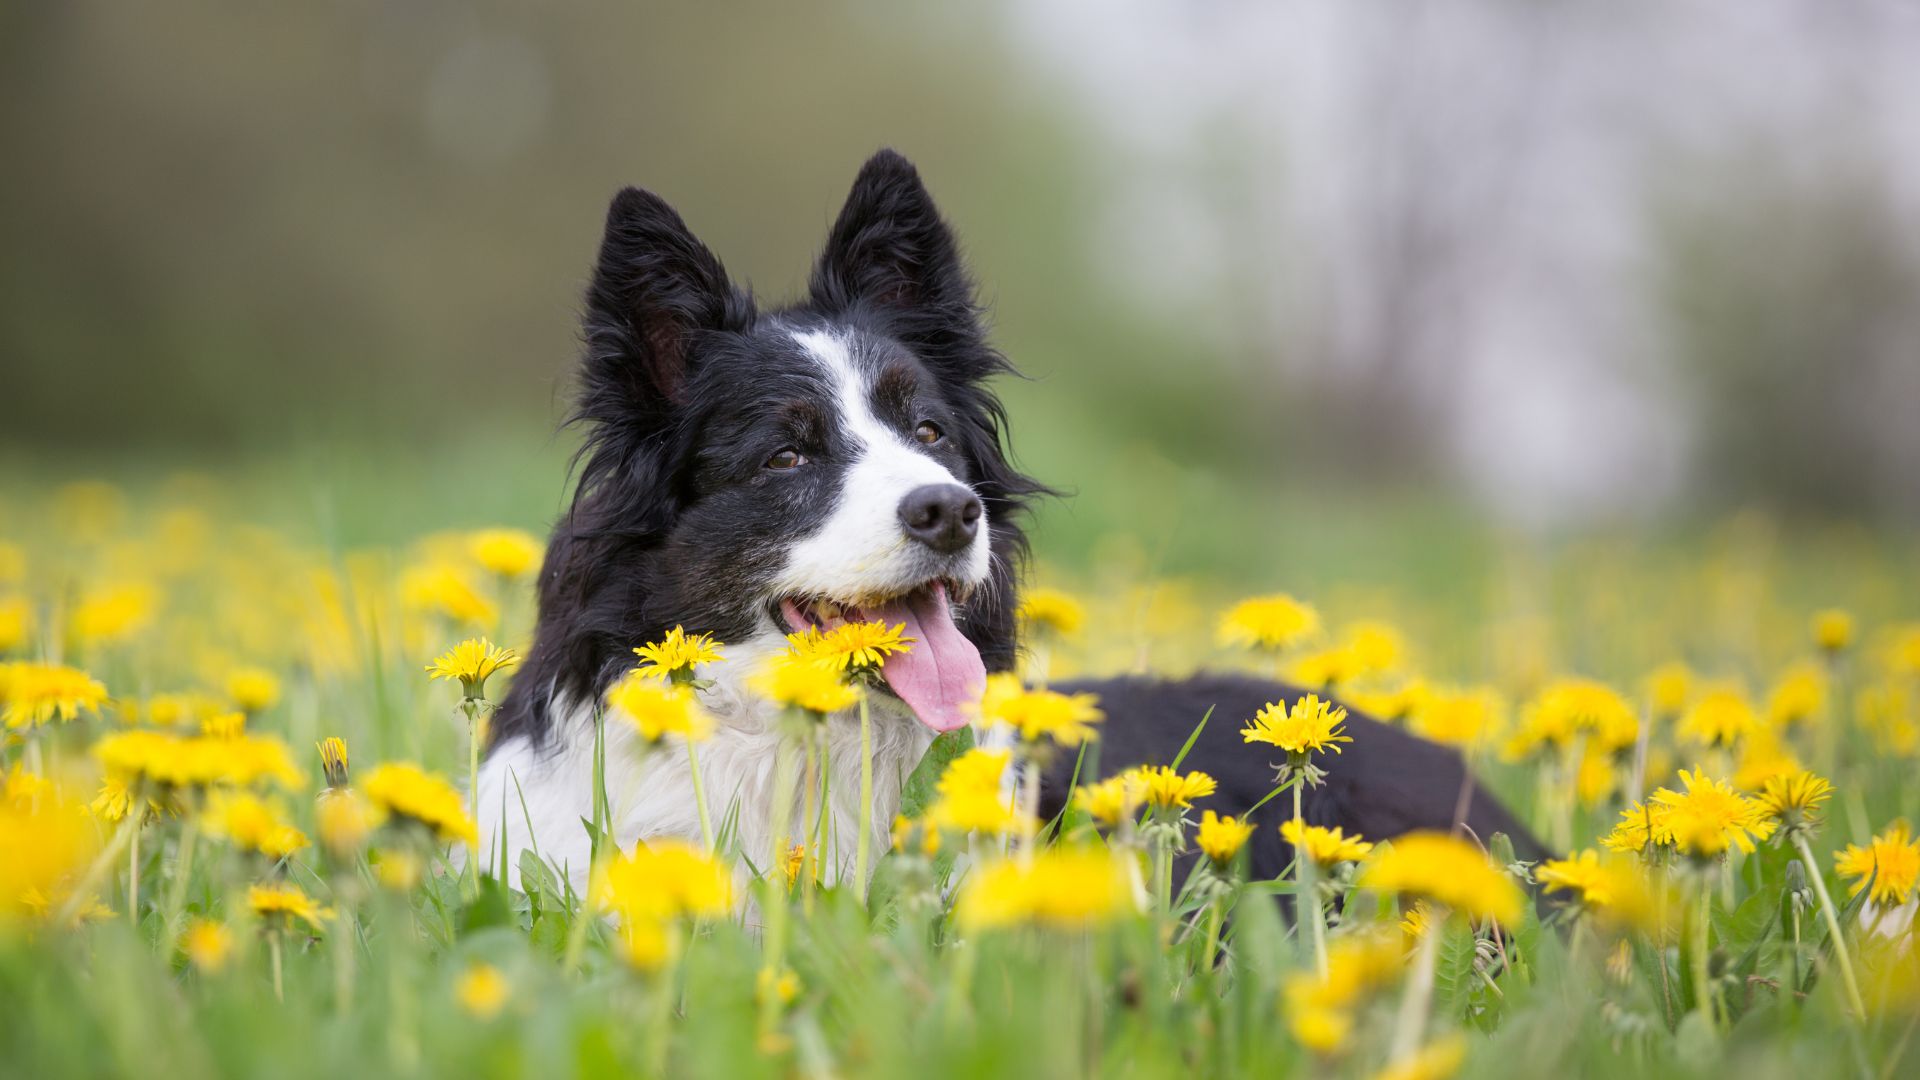 A border collie lying in a field of dandelions